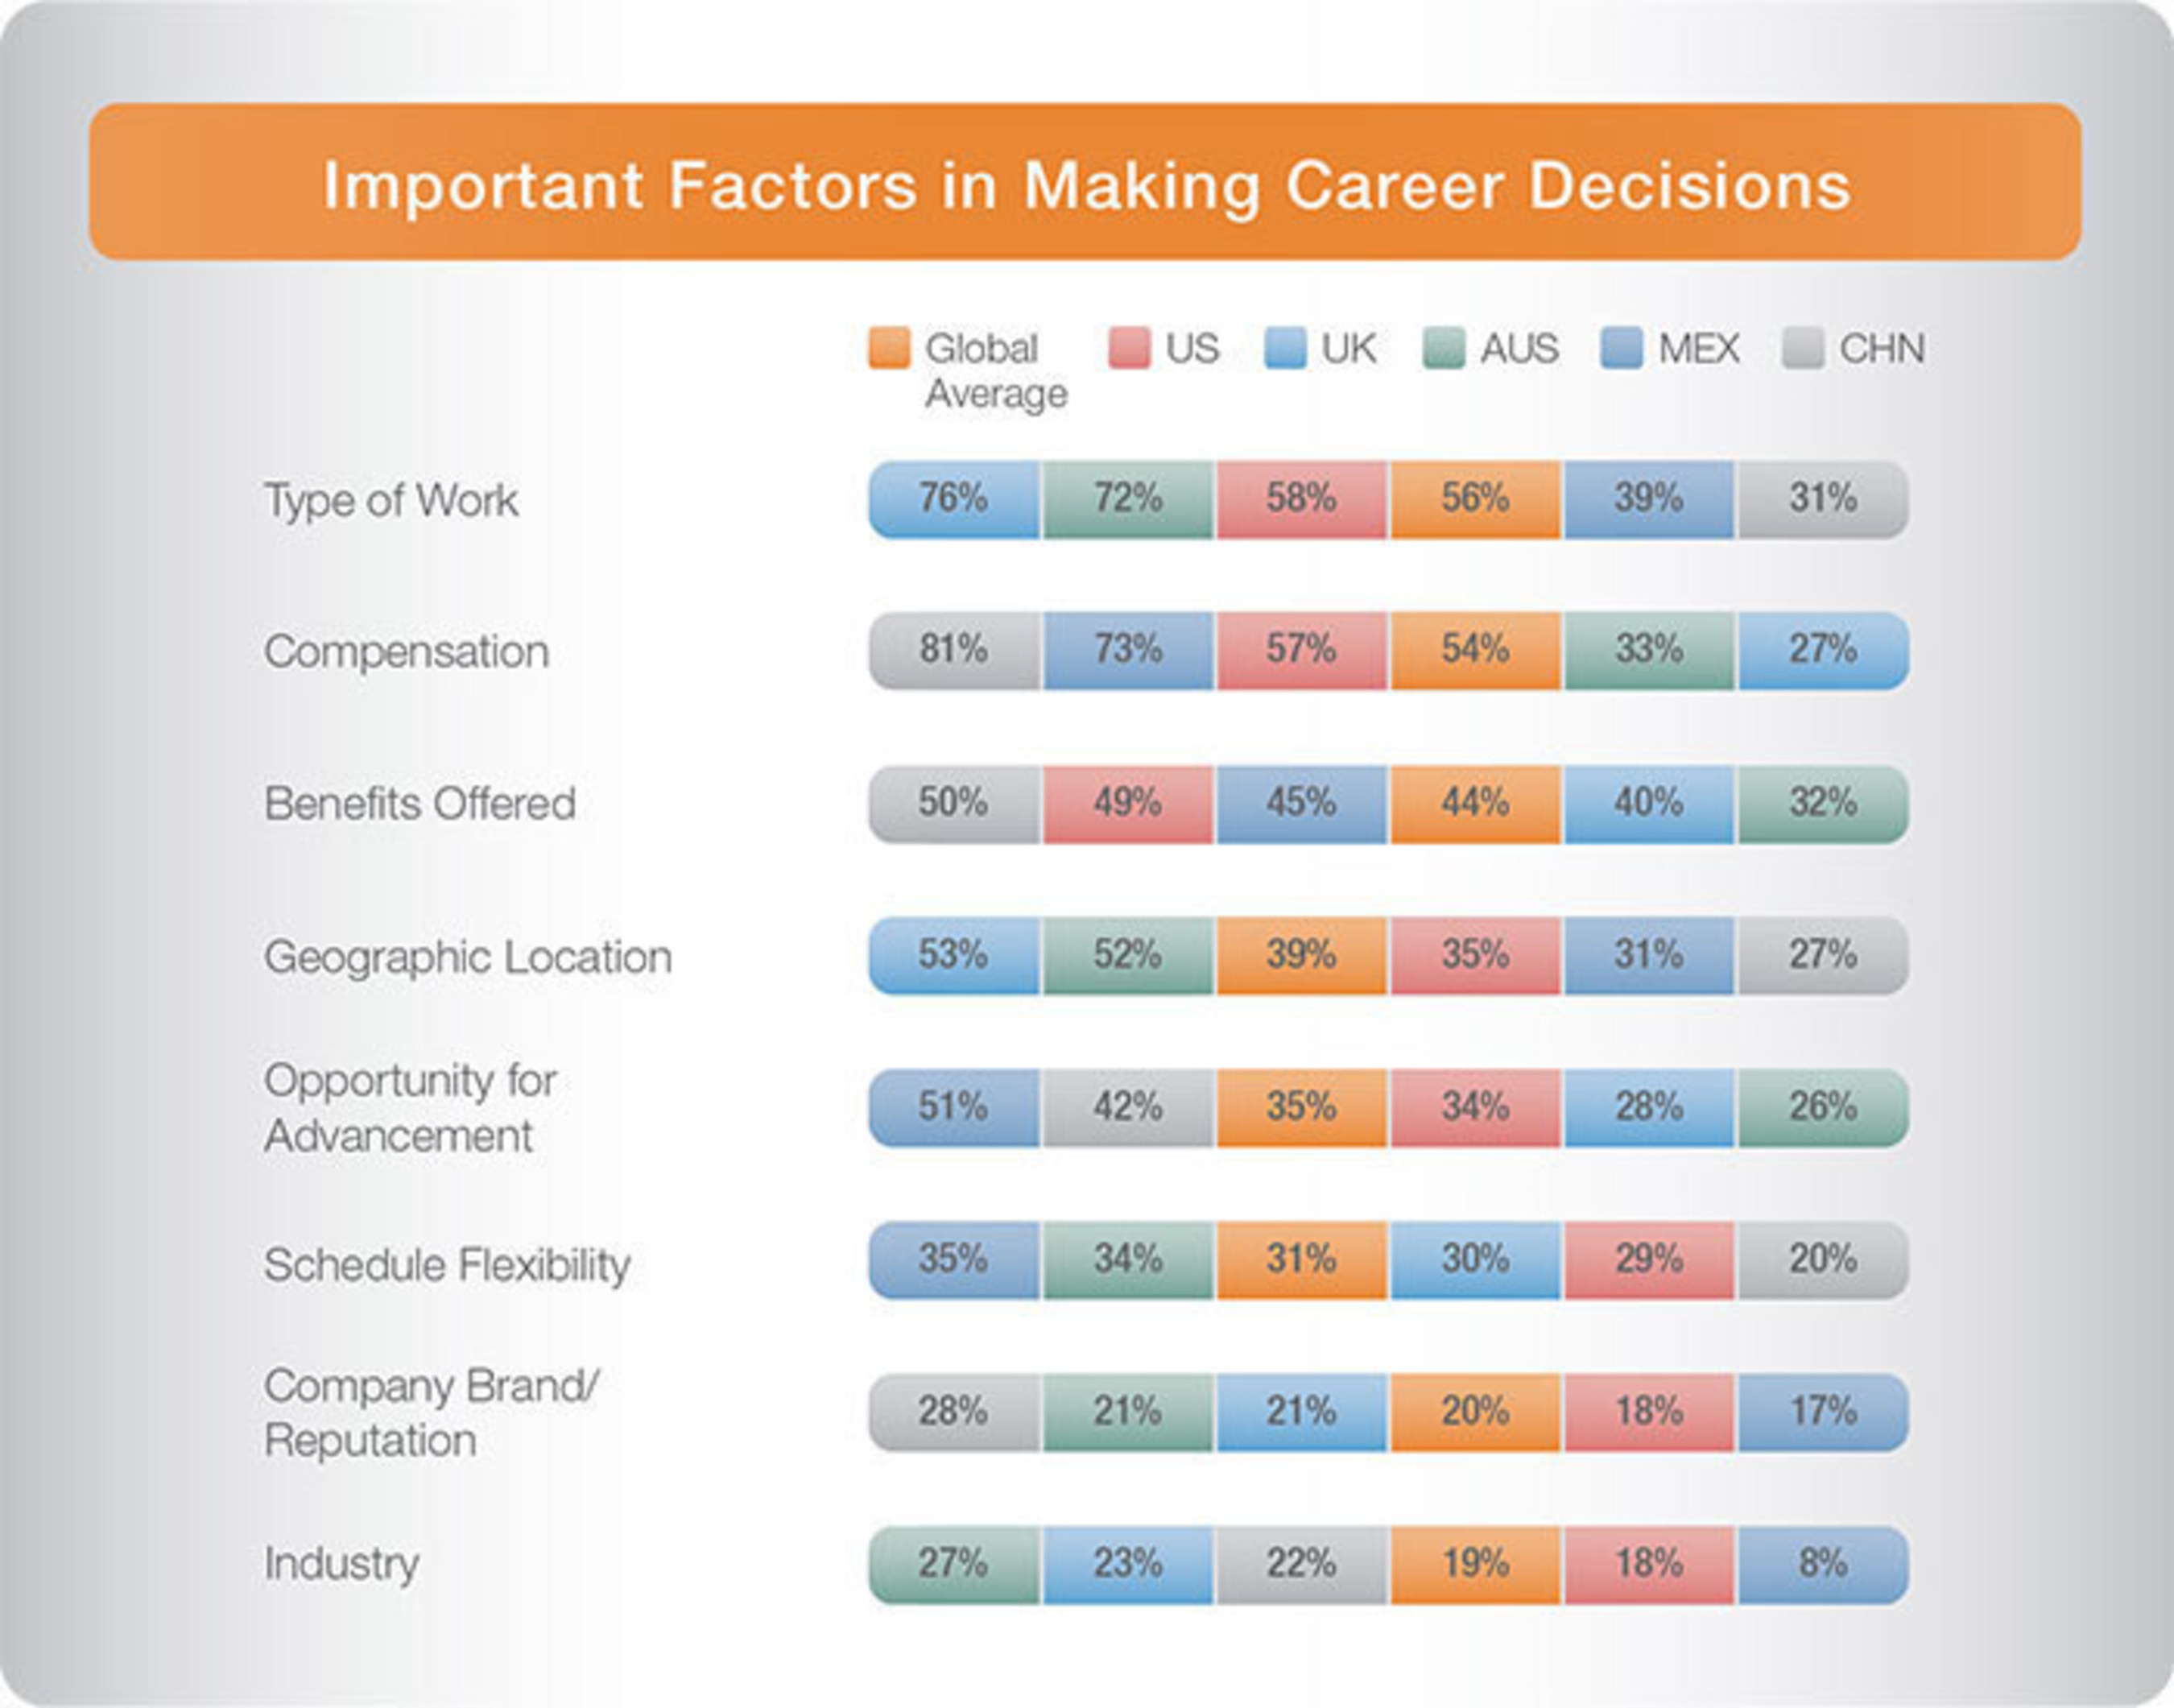 Important factors in making career decisions, from ManpowerGroup Solutions' report, "Below the Surface: Emerging Global Motivators and Job Search Preferences."